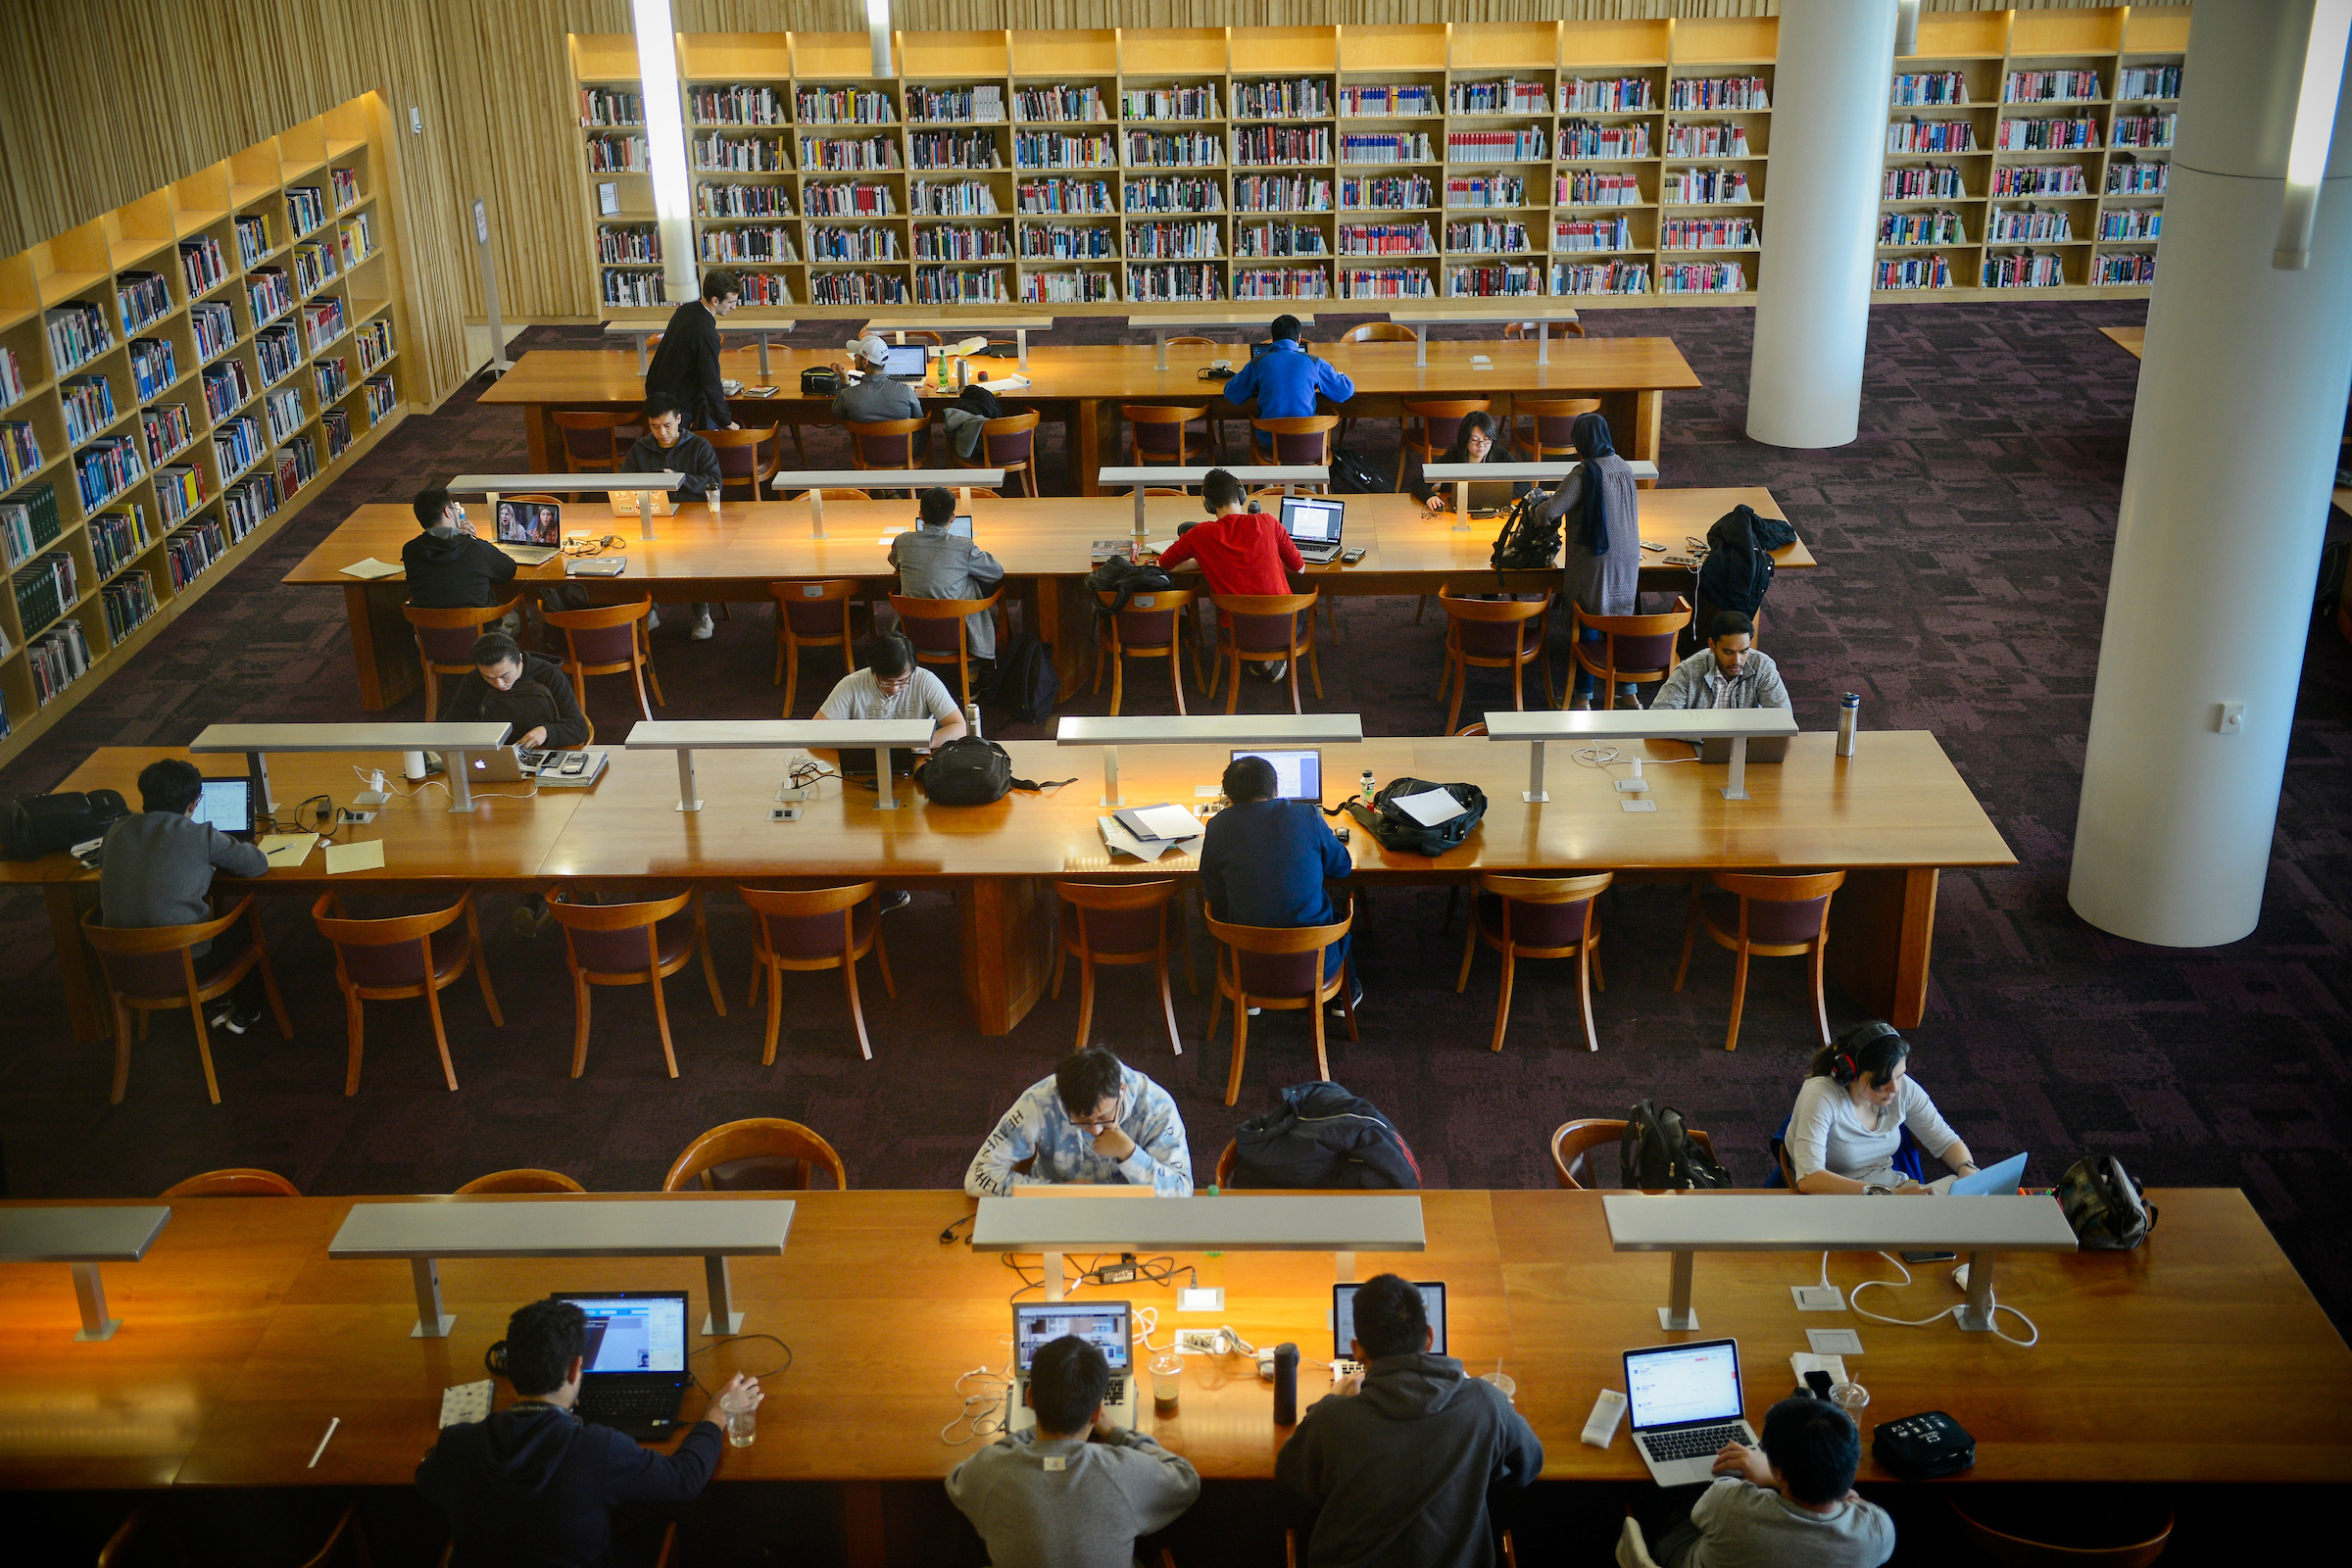 Students work and study in the James B. Hunt Jr. library.